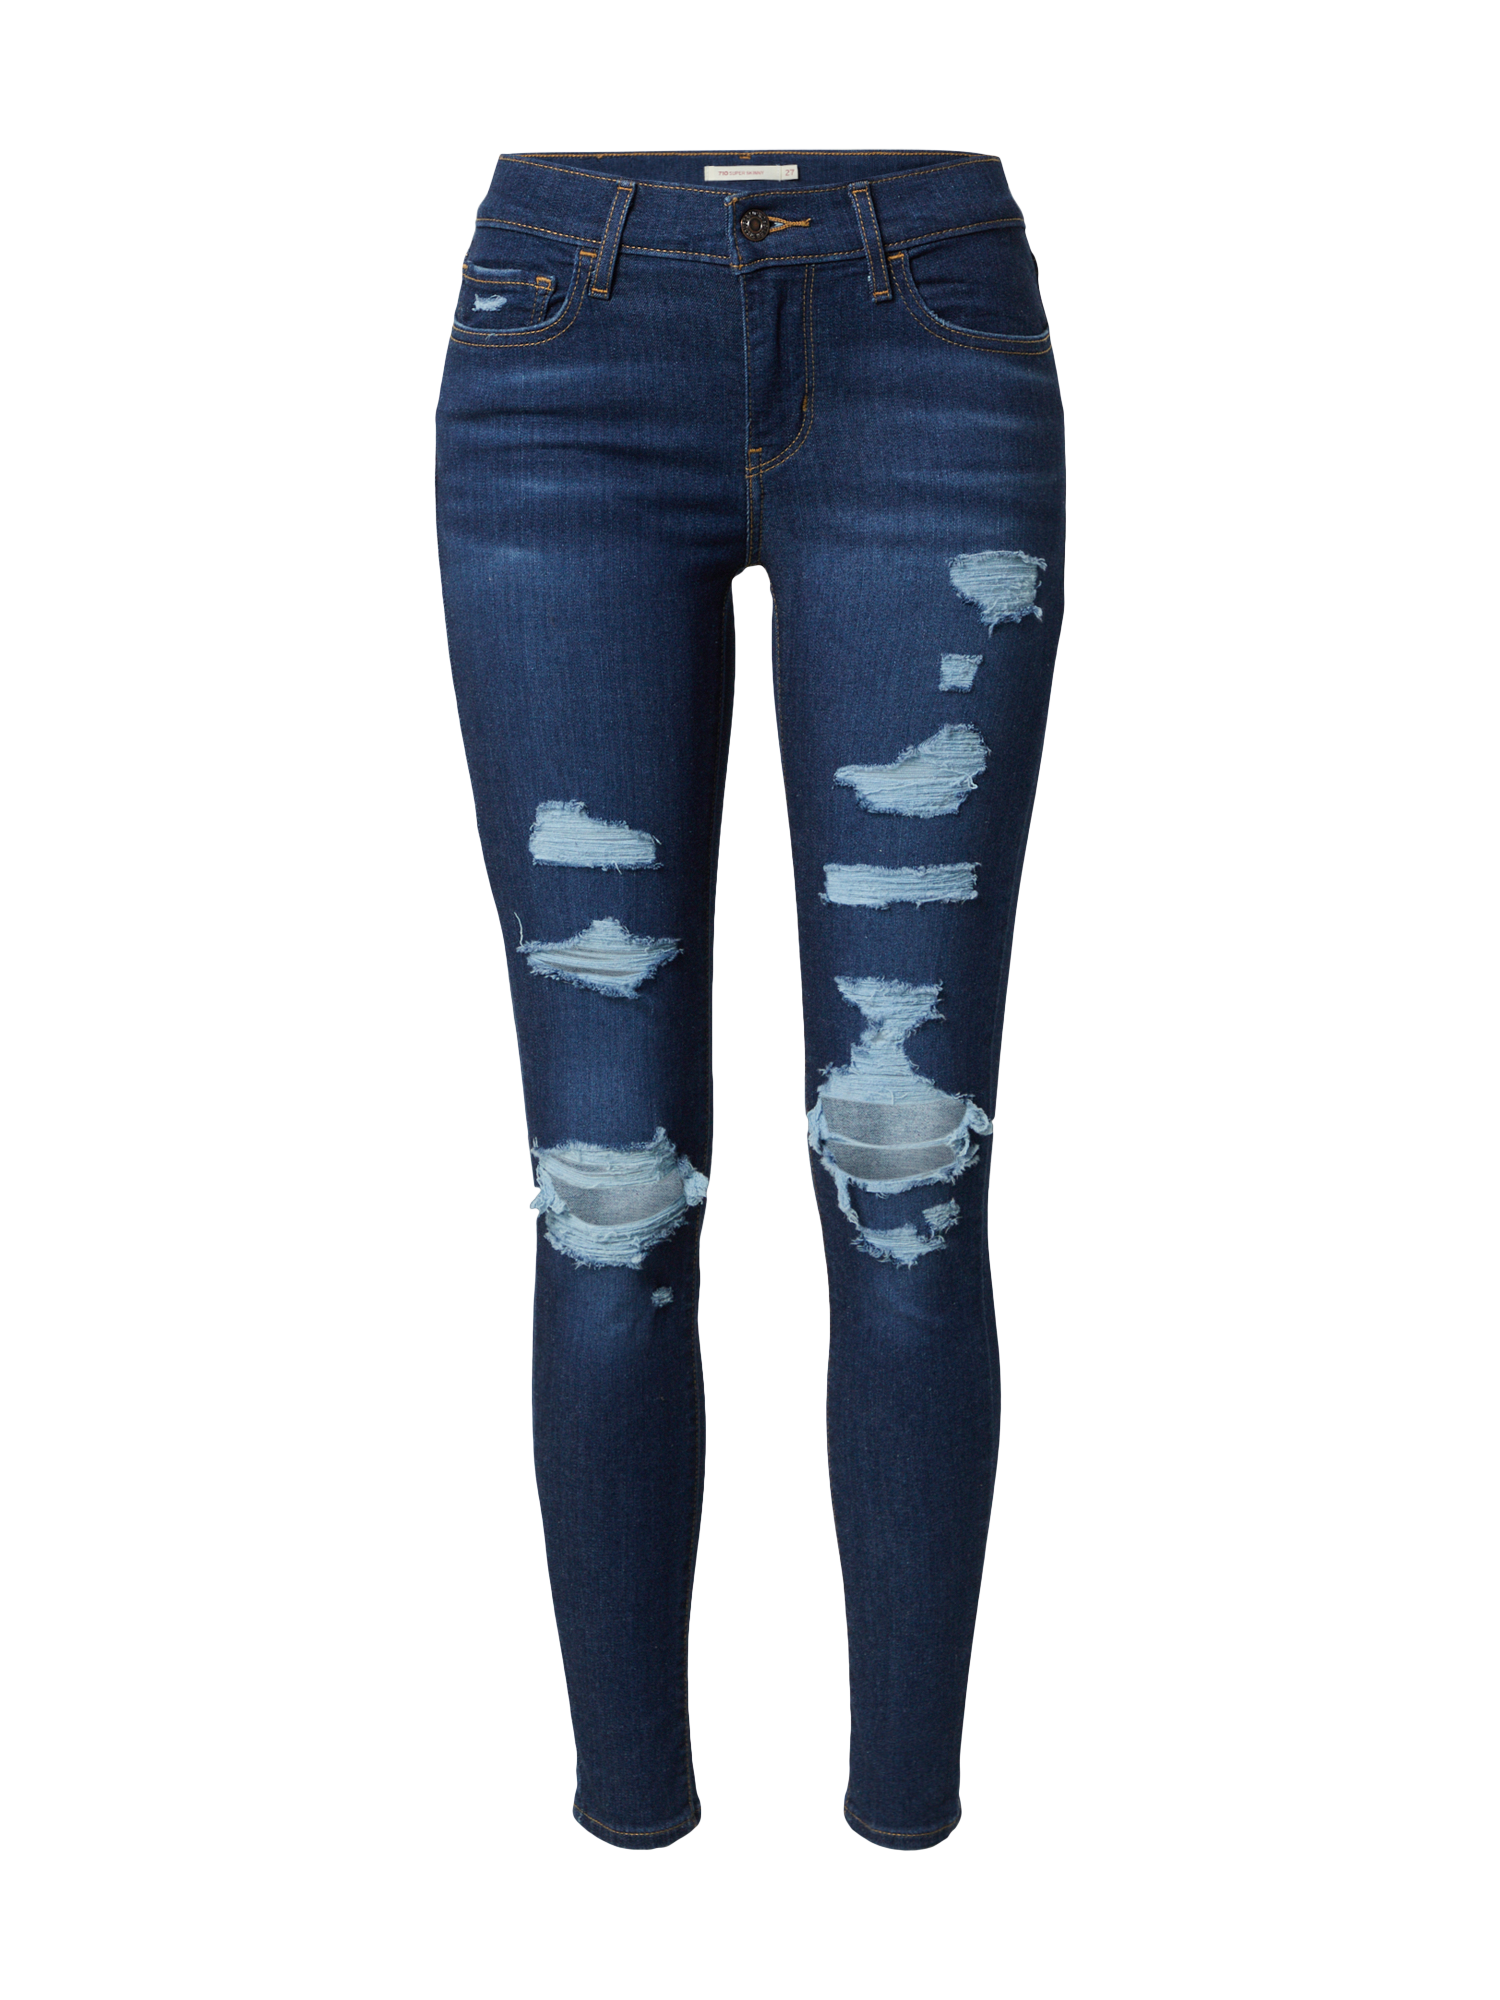 Jeans PROMO LEVIS Jeans in Blu Scuro 